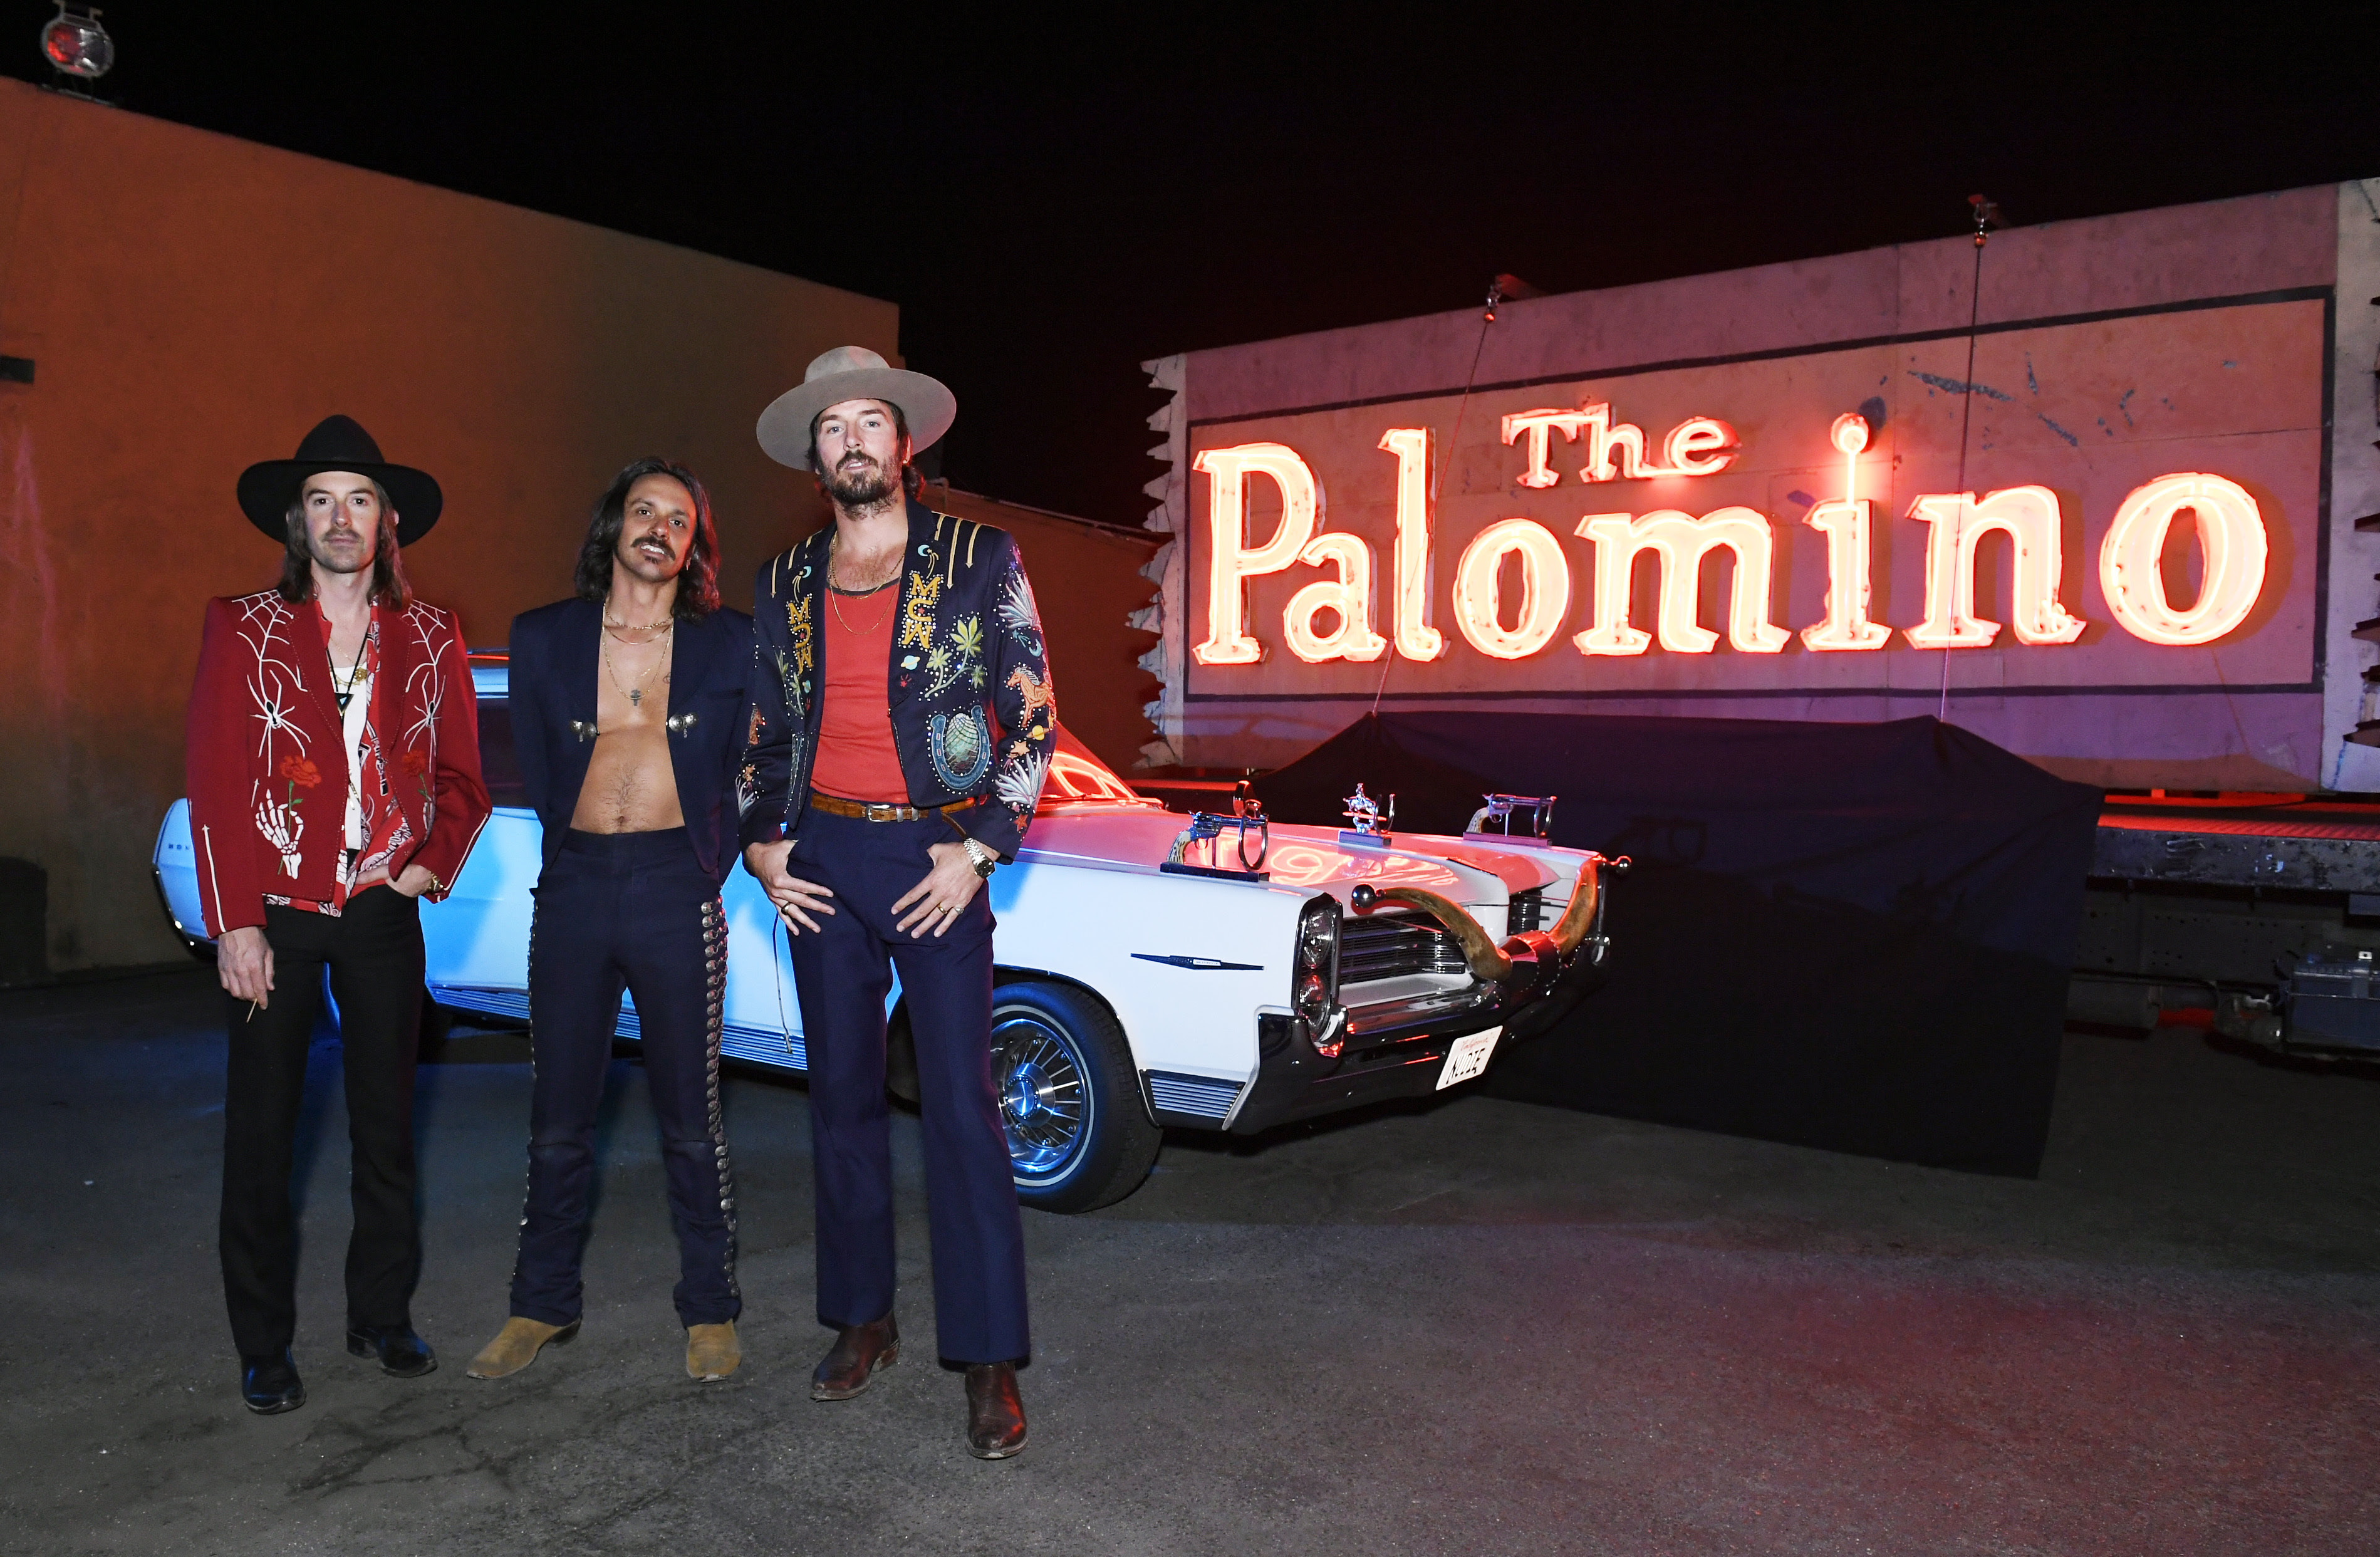 Midland Takes Over The Palomino for Unforgettable Performance